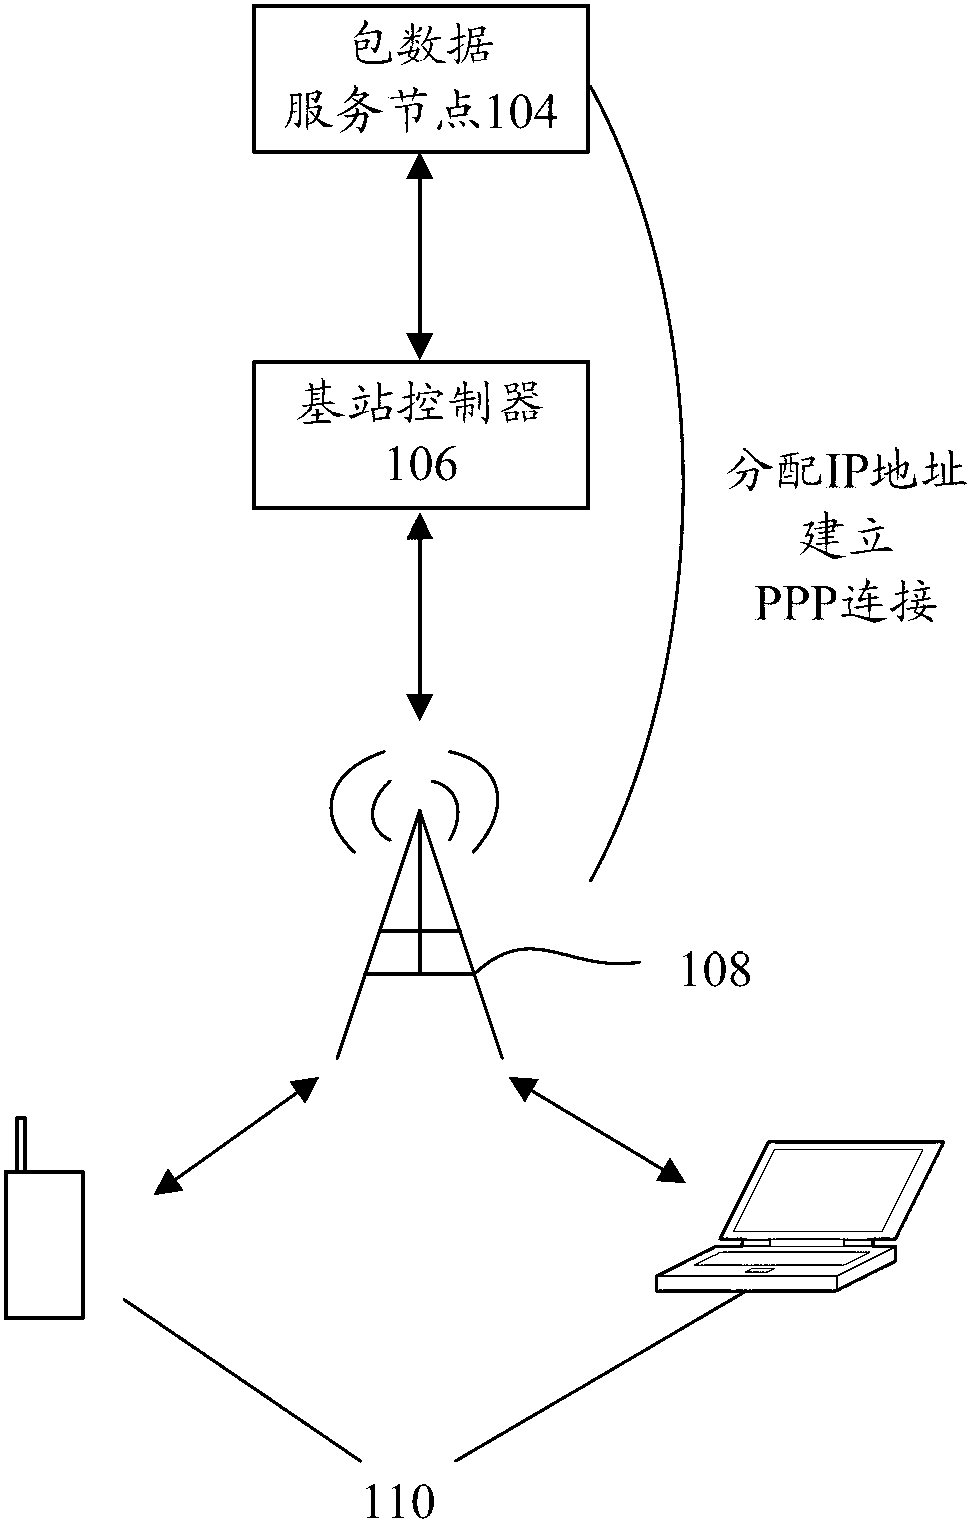 Mobile terminal and point-to-point connection retention method